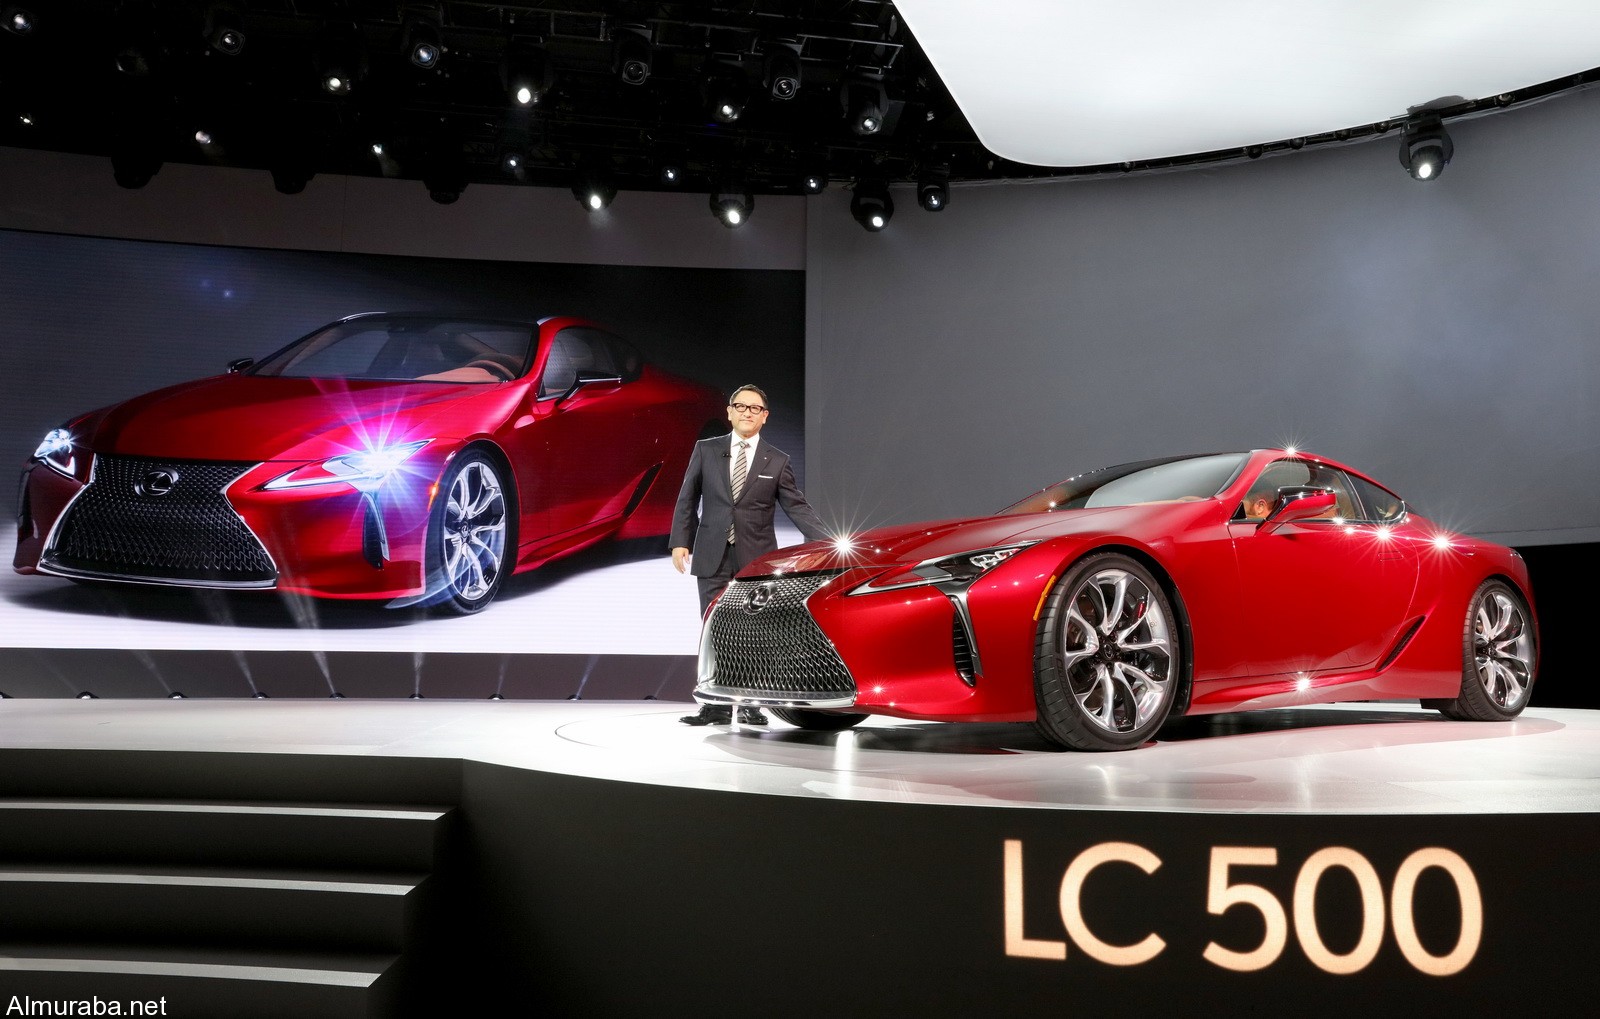 All-New Lexus LC 500 Word DebutDetroit Ð January 11, 2016 Ð Akio Toyoda, Toyota Motor Corporation President and Lexus Chief Branding Officer unveiled the all-new Lexus LC 500 luxury sports car at the North American International Auto Show.  Lexus LC 500 features a 467 hp., V-8 engine, a 10-speed automatic transmission and amazing driving dynamics.  For more information contact Maurice Durand at 714-889-9908.